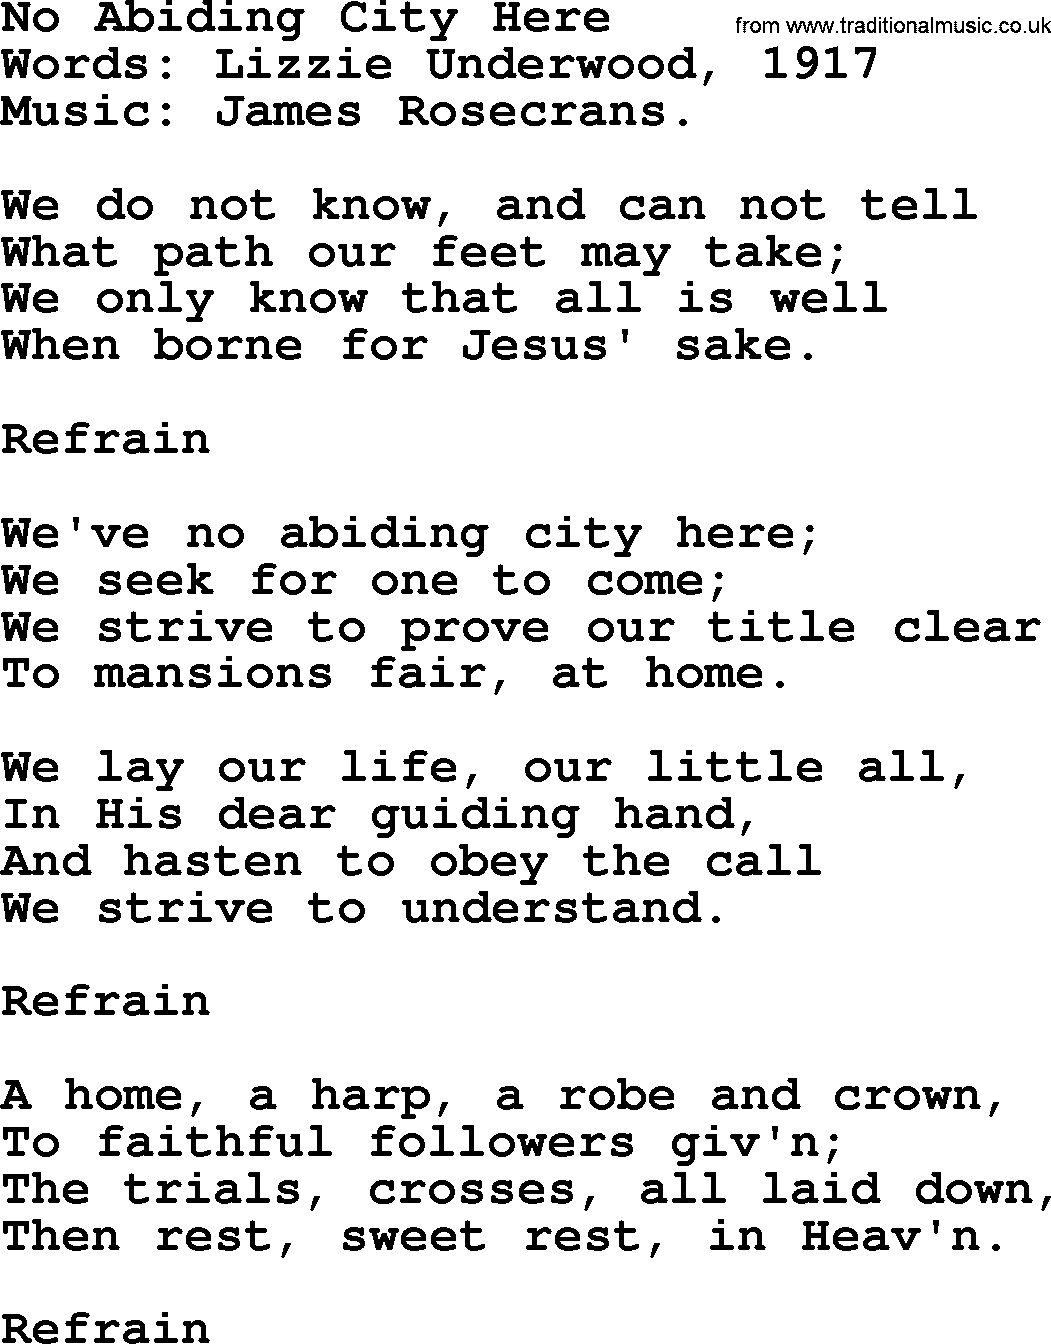 Songs and Hymns about Heaven: No Abiding City Here lyrics with PDF